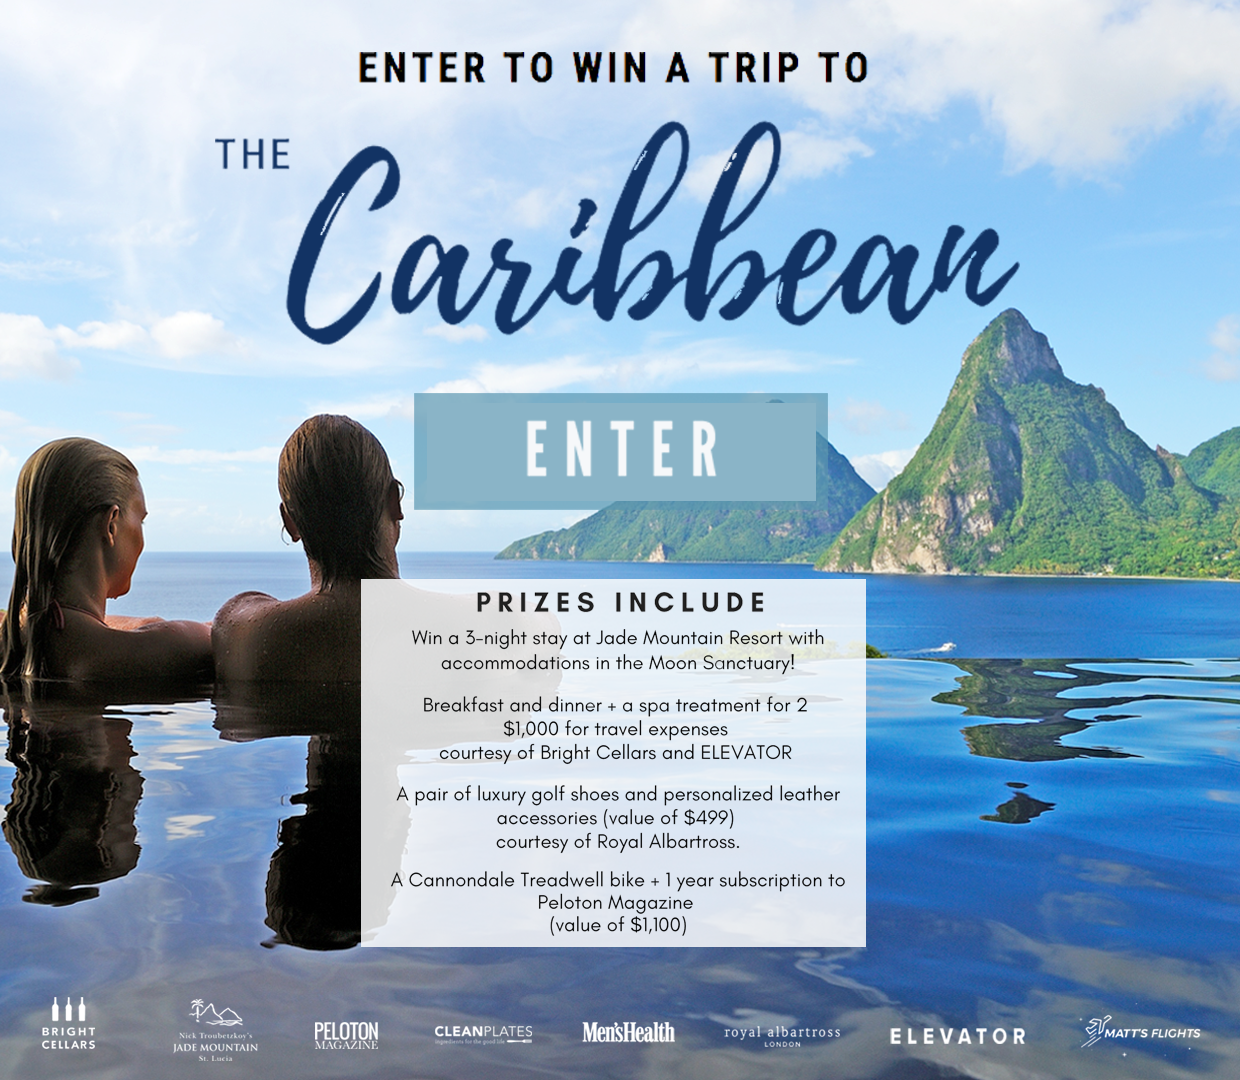 Win a 3-night stay at Jade Mountain Resort with accommodations in the Moon Sanctuary! Prize includes: Breakfast and dinner, a spa treatment for two, $1,000 for travel expenses (courtesy of Bright Cellars and ELEVATOR), a pair of luxury golf shoes and personalized leather accessories valued at $499 (courtesy of Royal Albartross), and a Cannondale Treadwell bike and a one year subscription to Peloton Magazine valued $1,100.